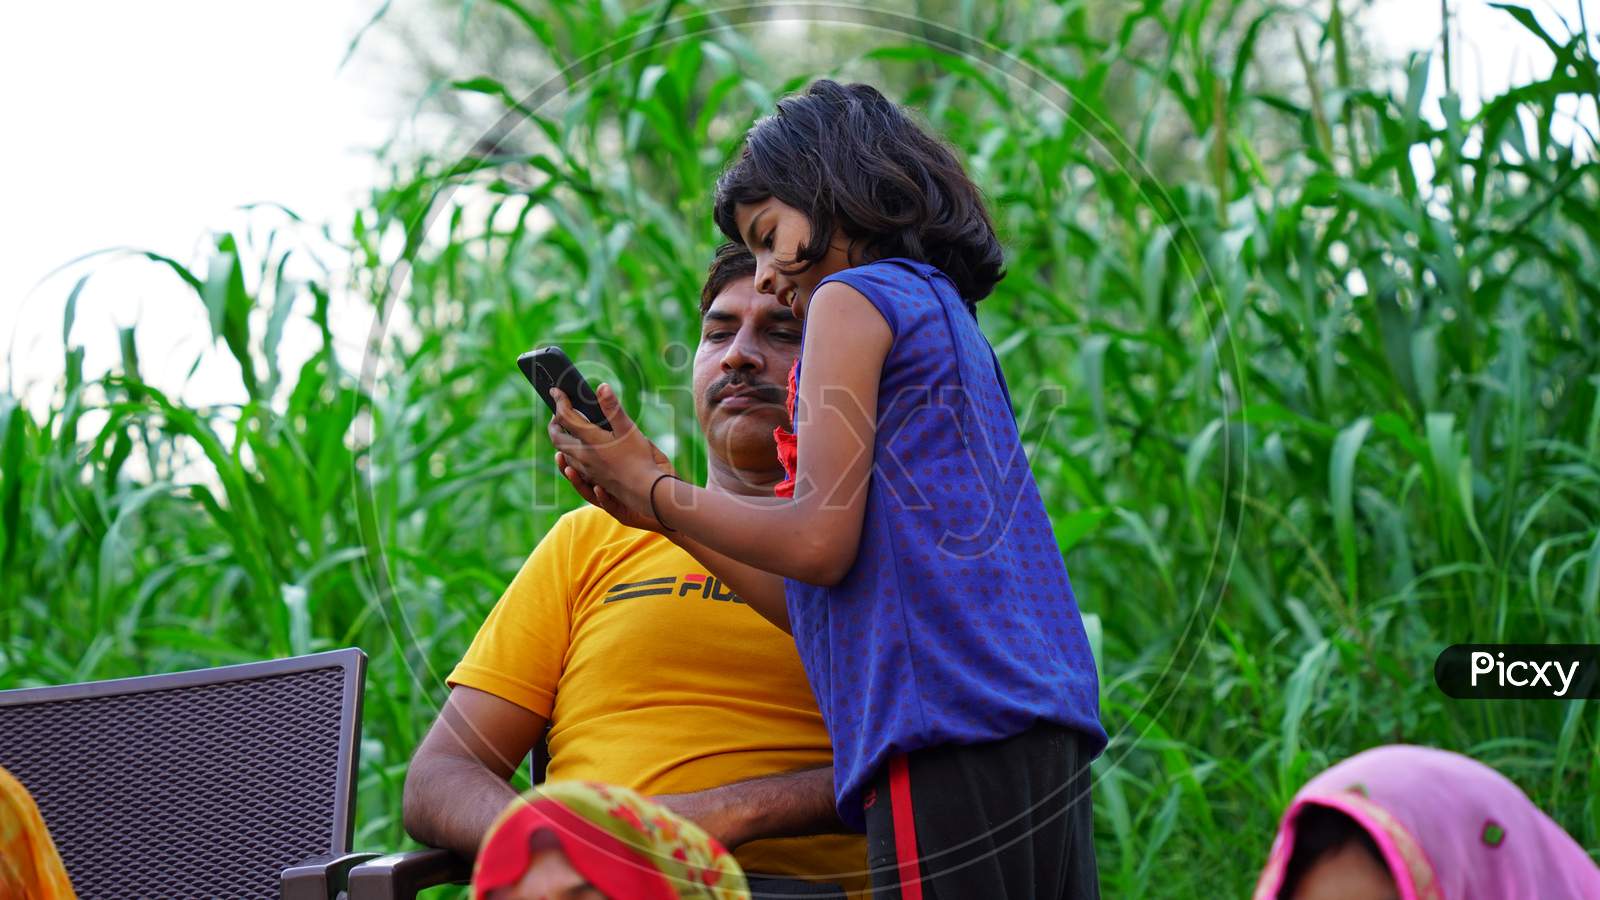 Cheerful little girl showing smart phone to her father.